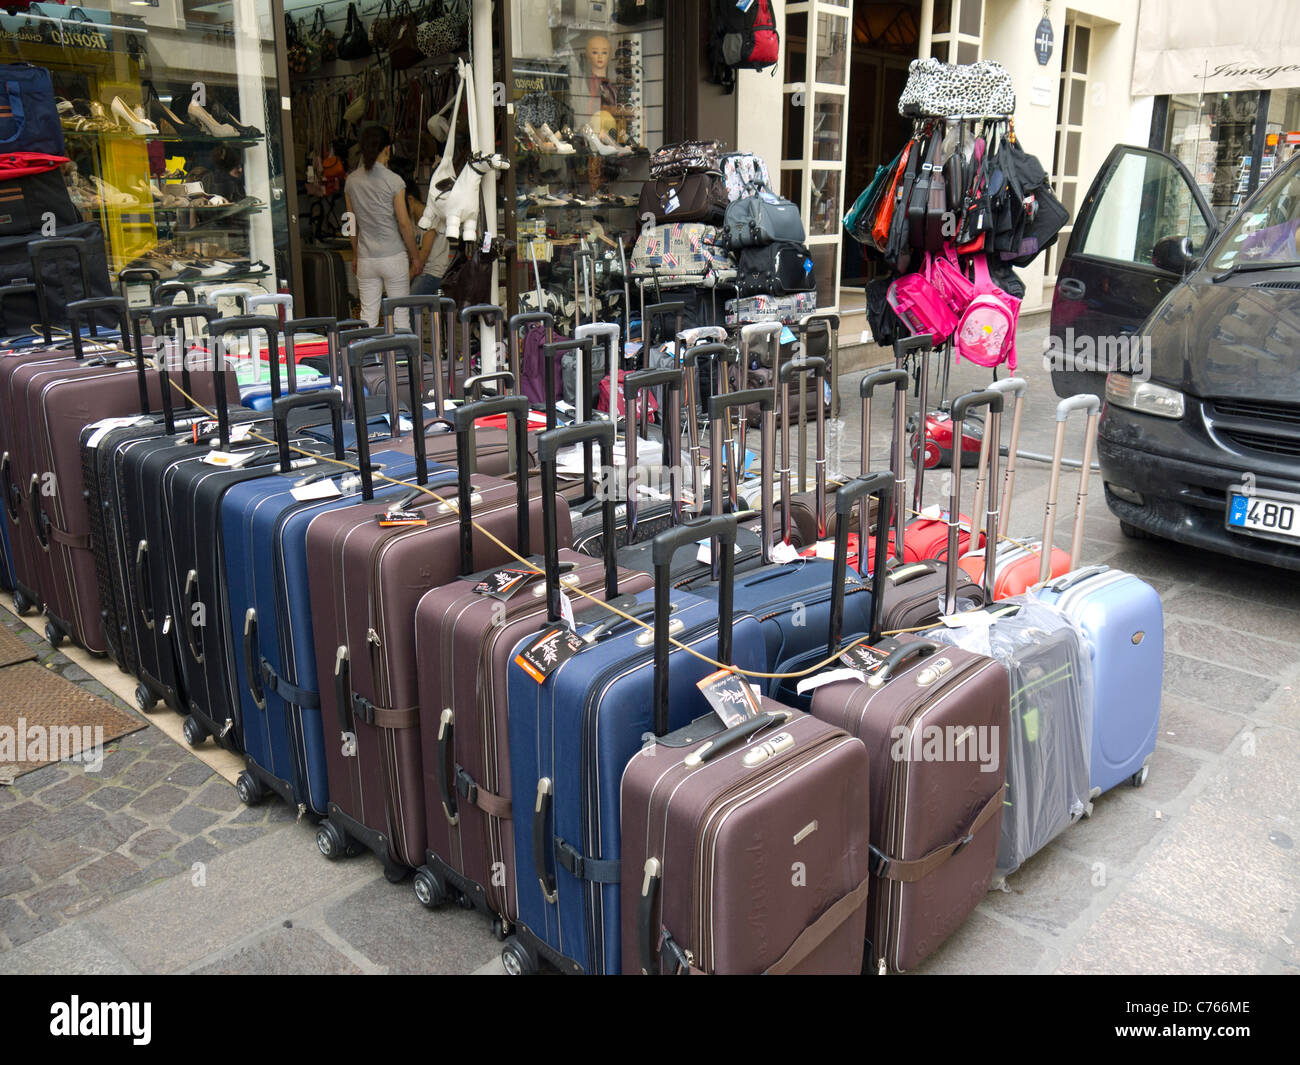 Rows of suitcases for sale in Paris, France Stock Photo